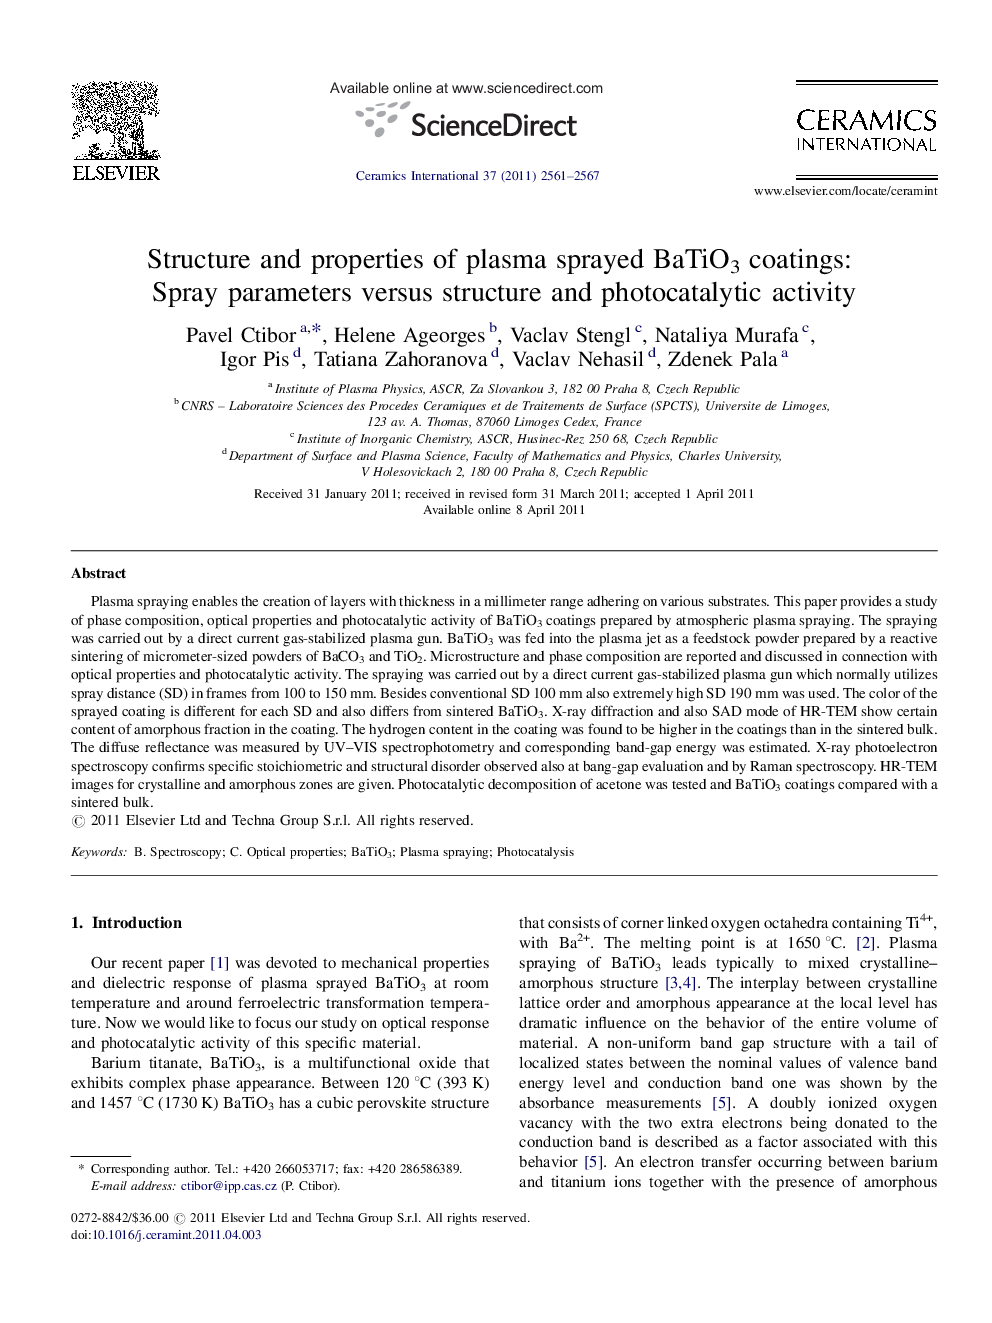 Structure and properties of plasma sprayed BaTiO3 coatings: Spray parameters versus structure and photocatalytic activity